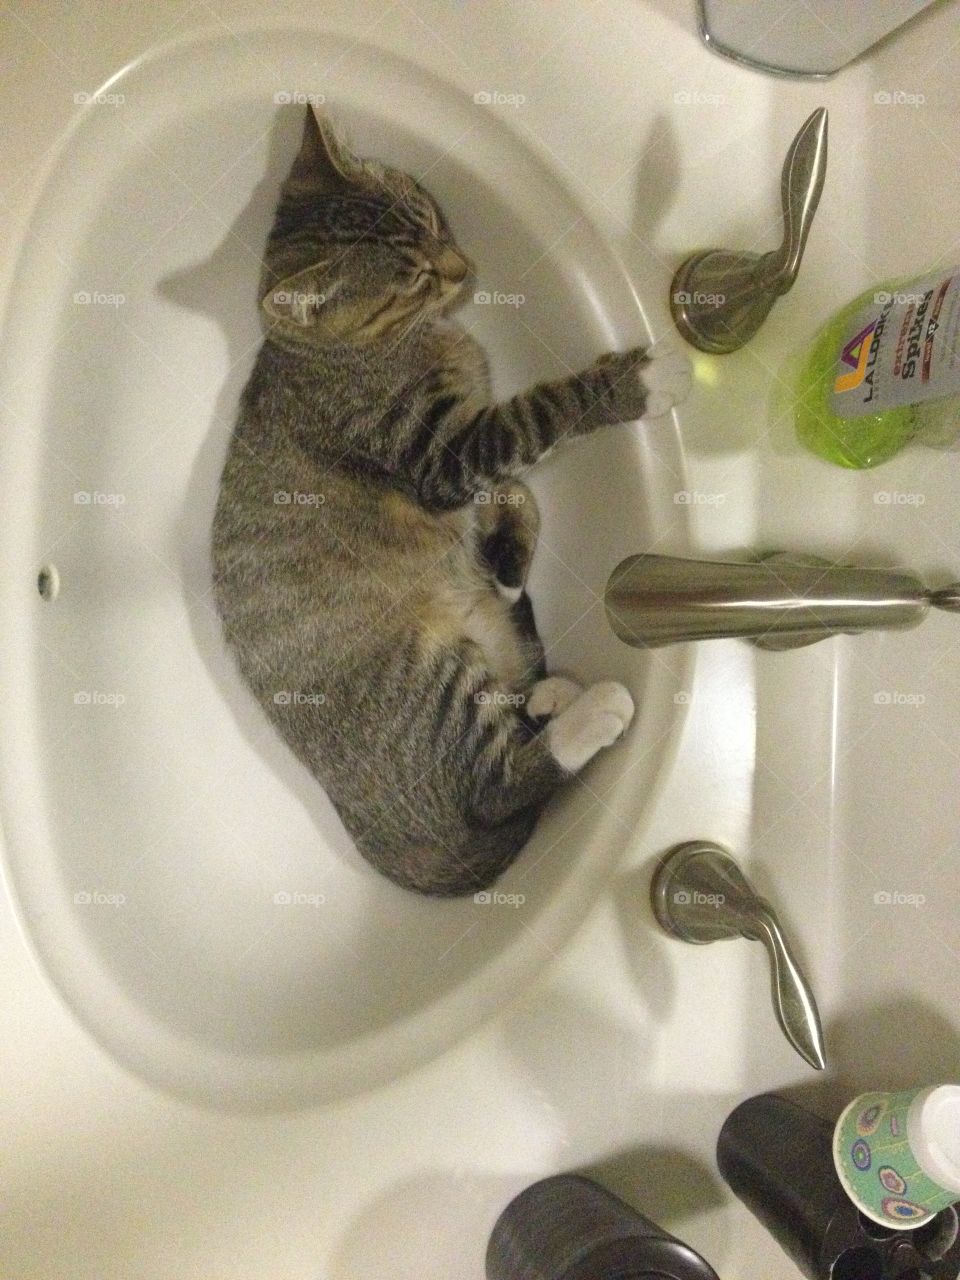 My cat loves to sleep in the sink
